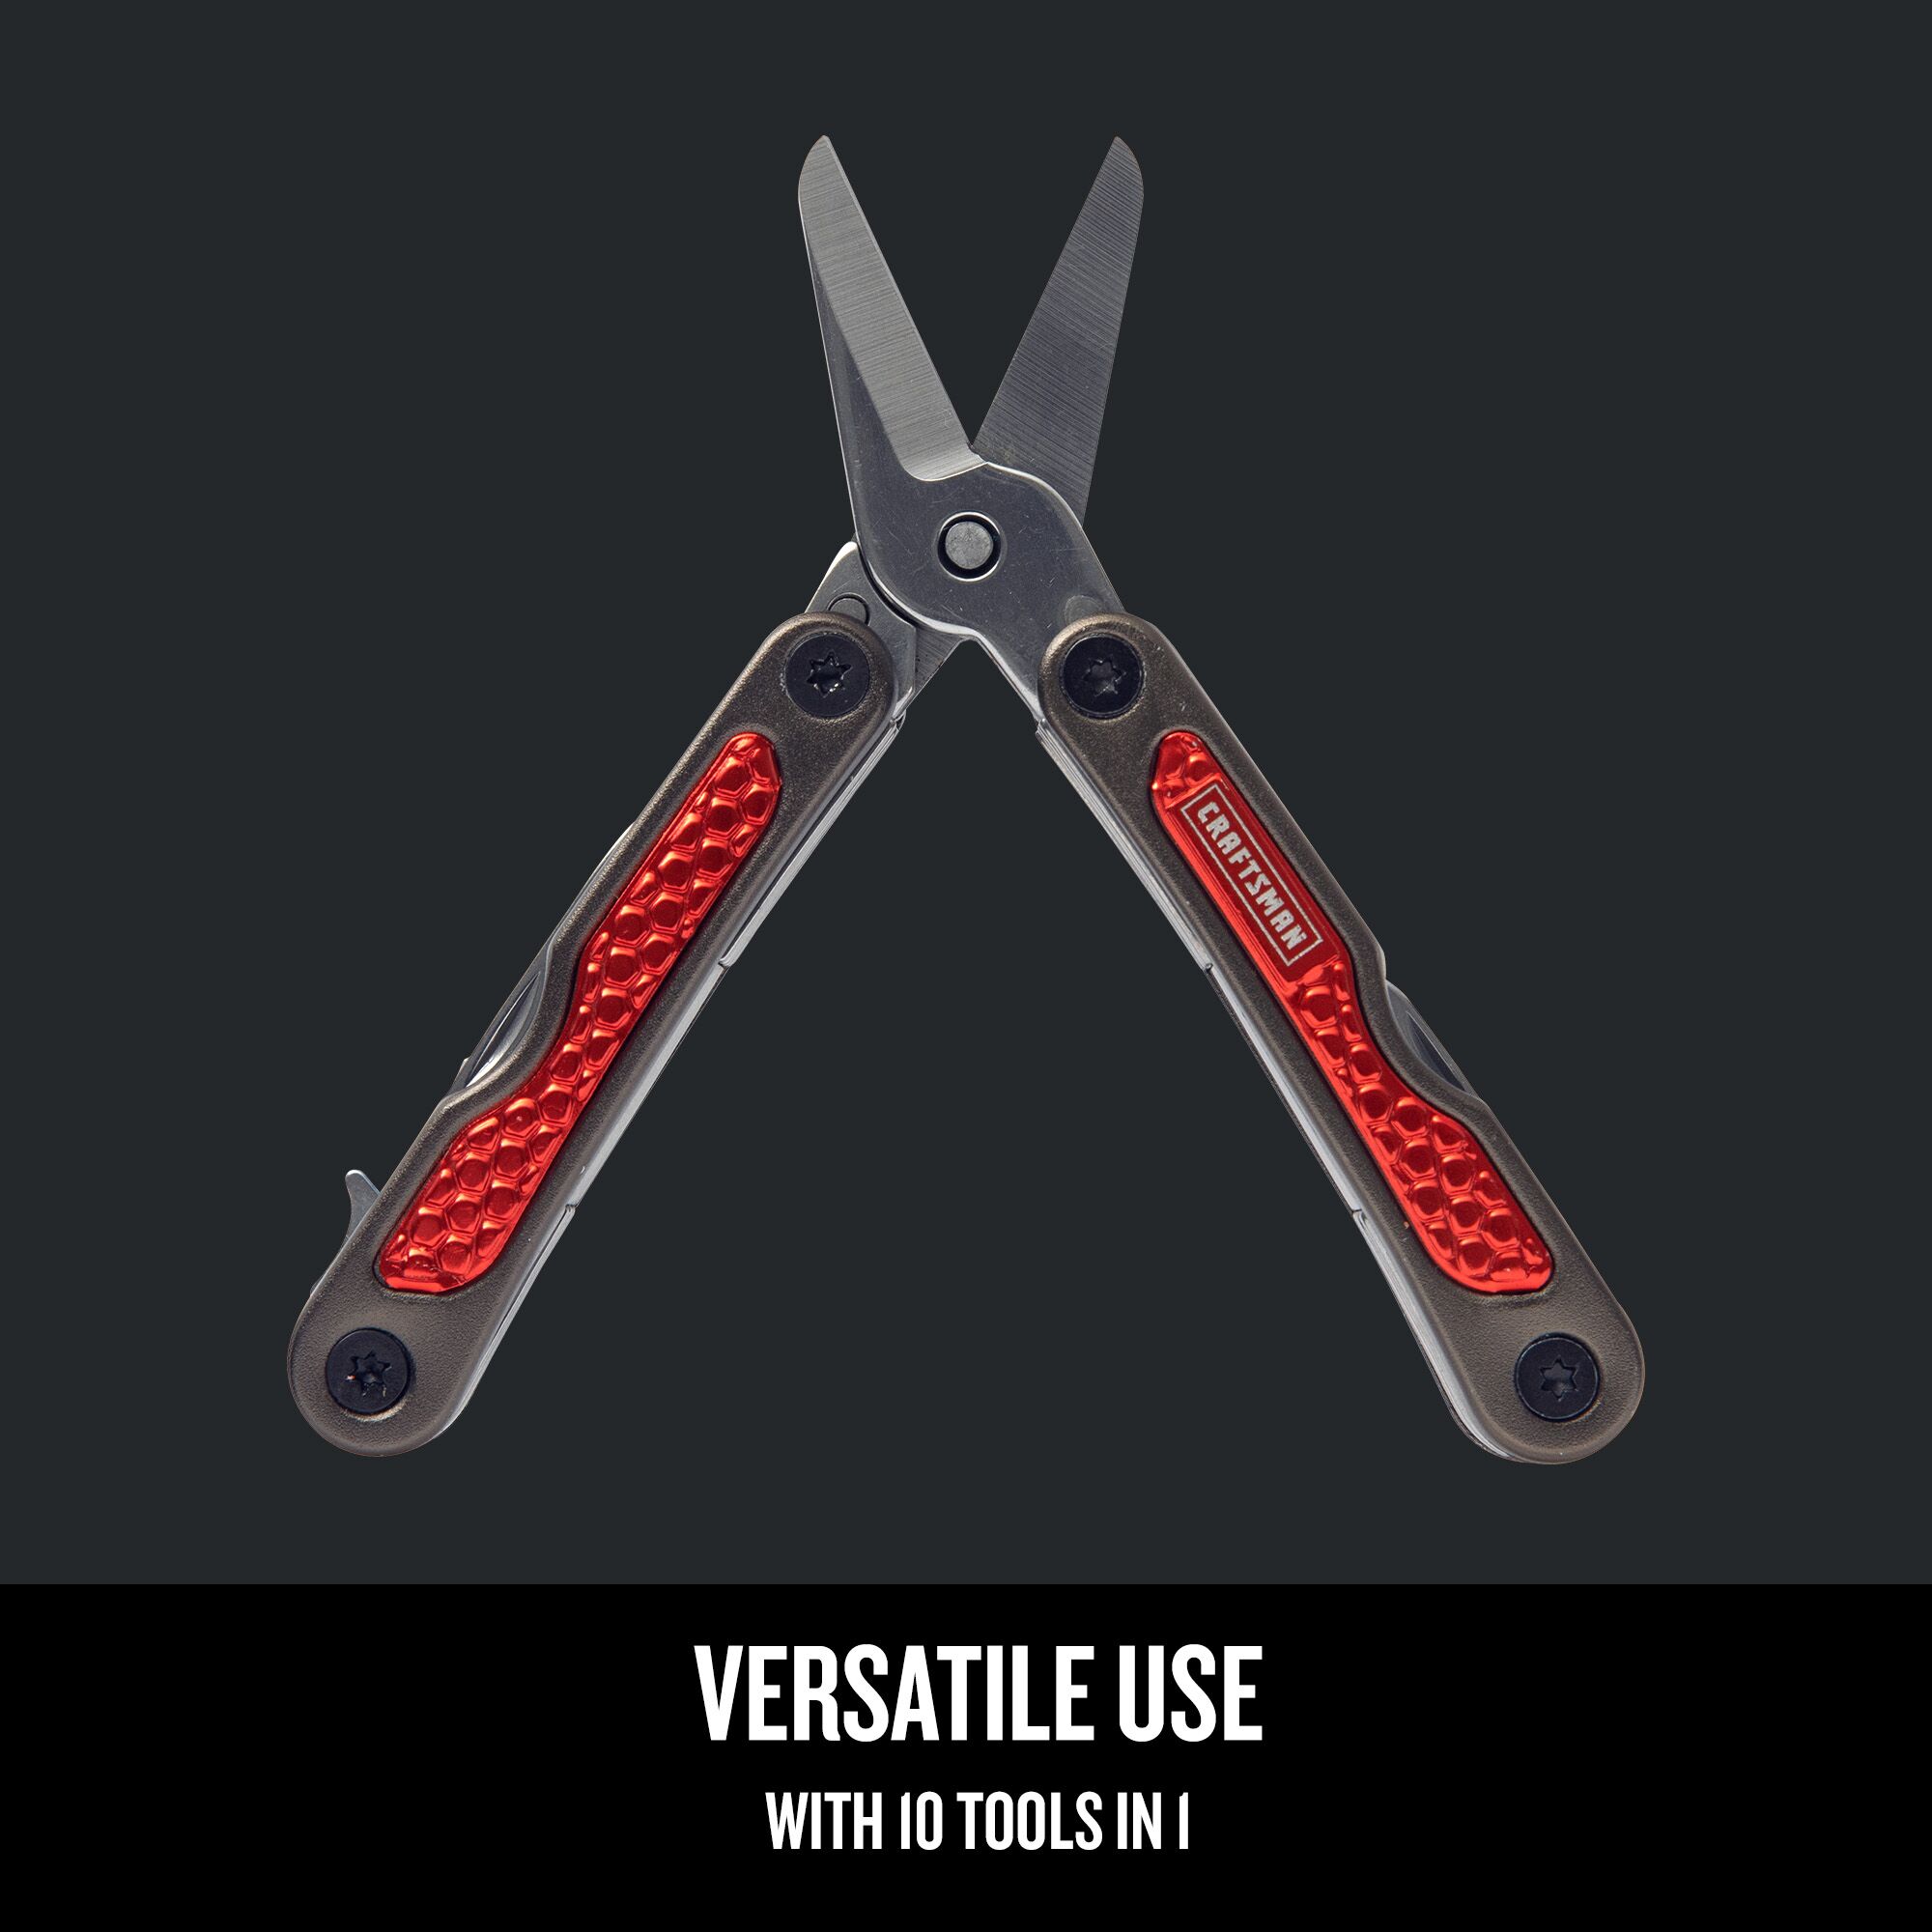 Graphic of CRAFTSMAN Multi-Tools highlighting product features